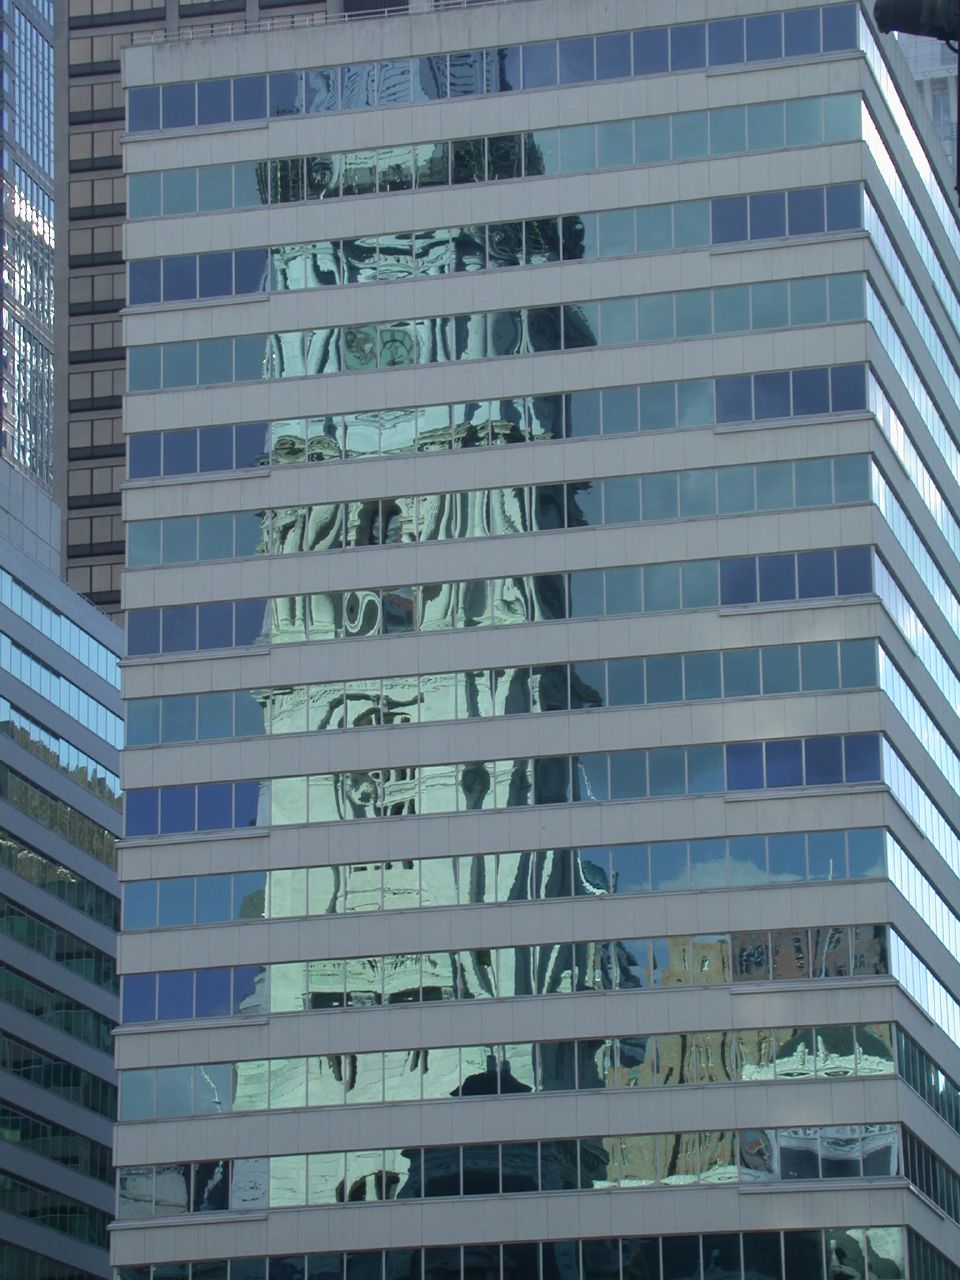 the side of a building has many windows and reflects in the glass